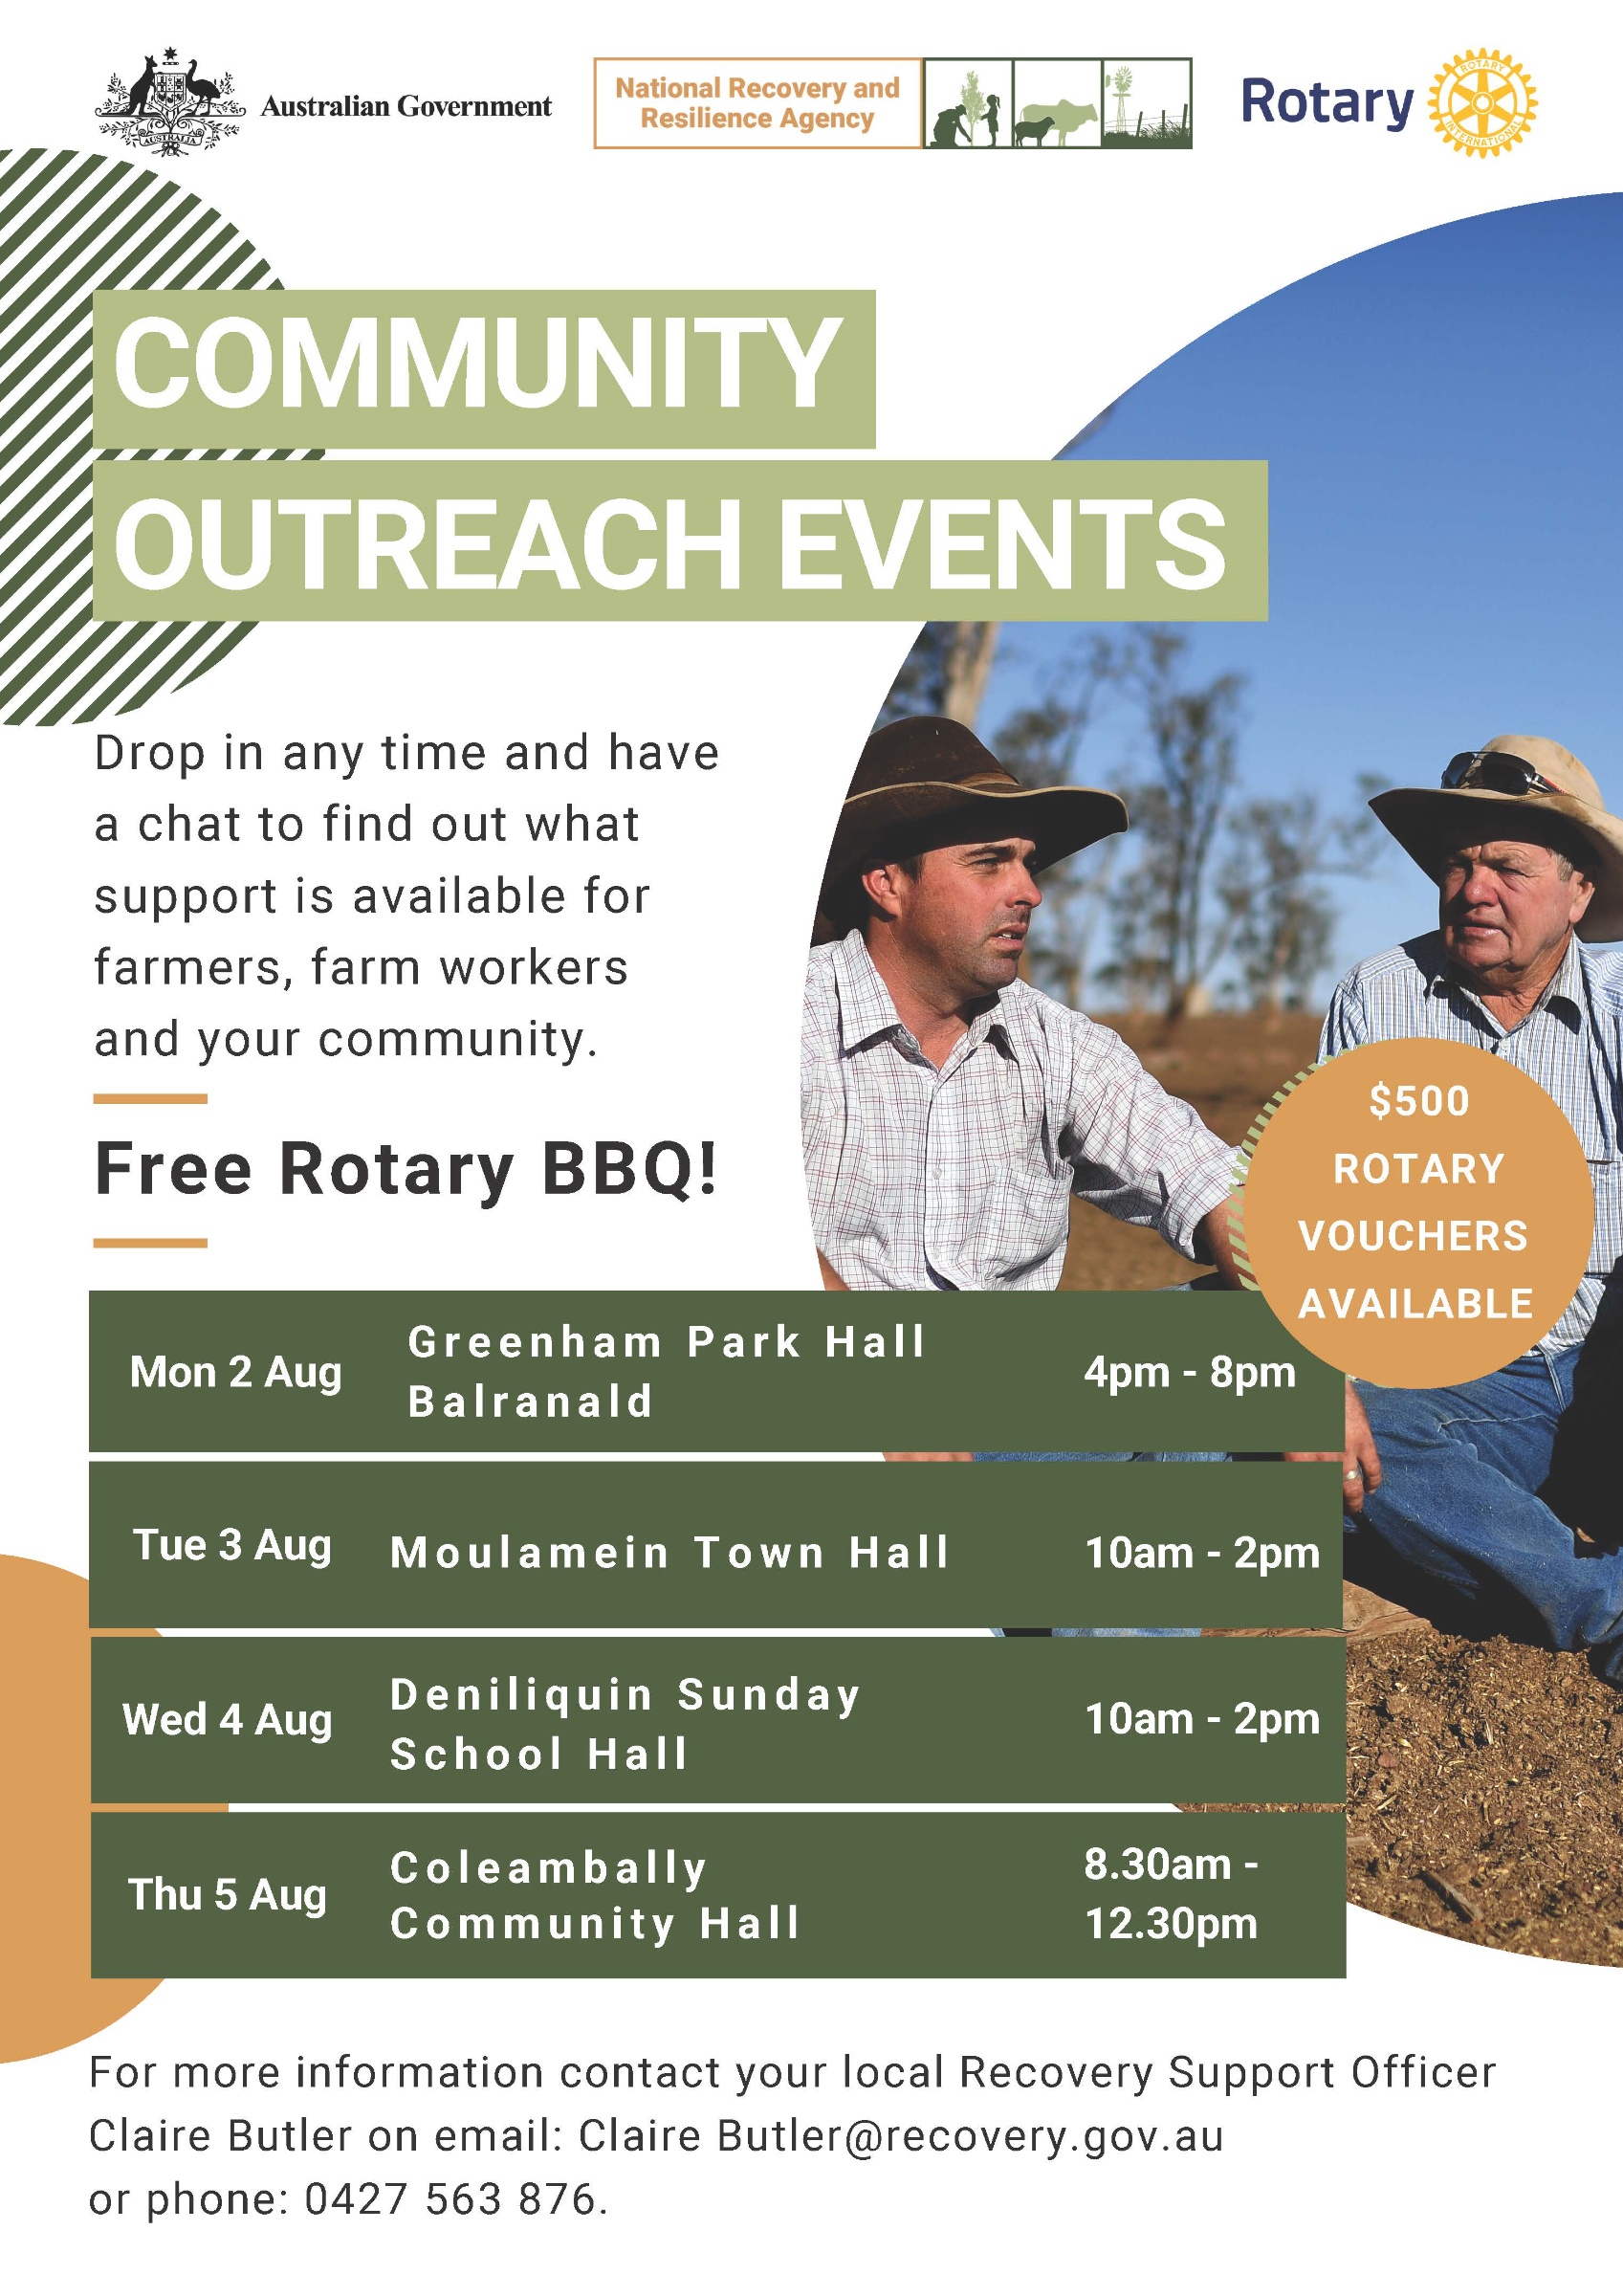 Community Outreach Events - Farming and drought support - POSTPONED - DATE TO BE ADVISED